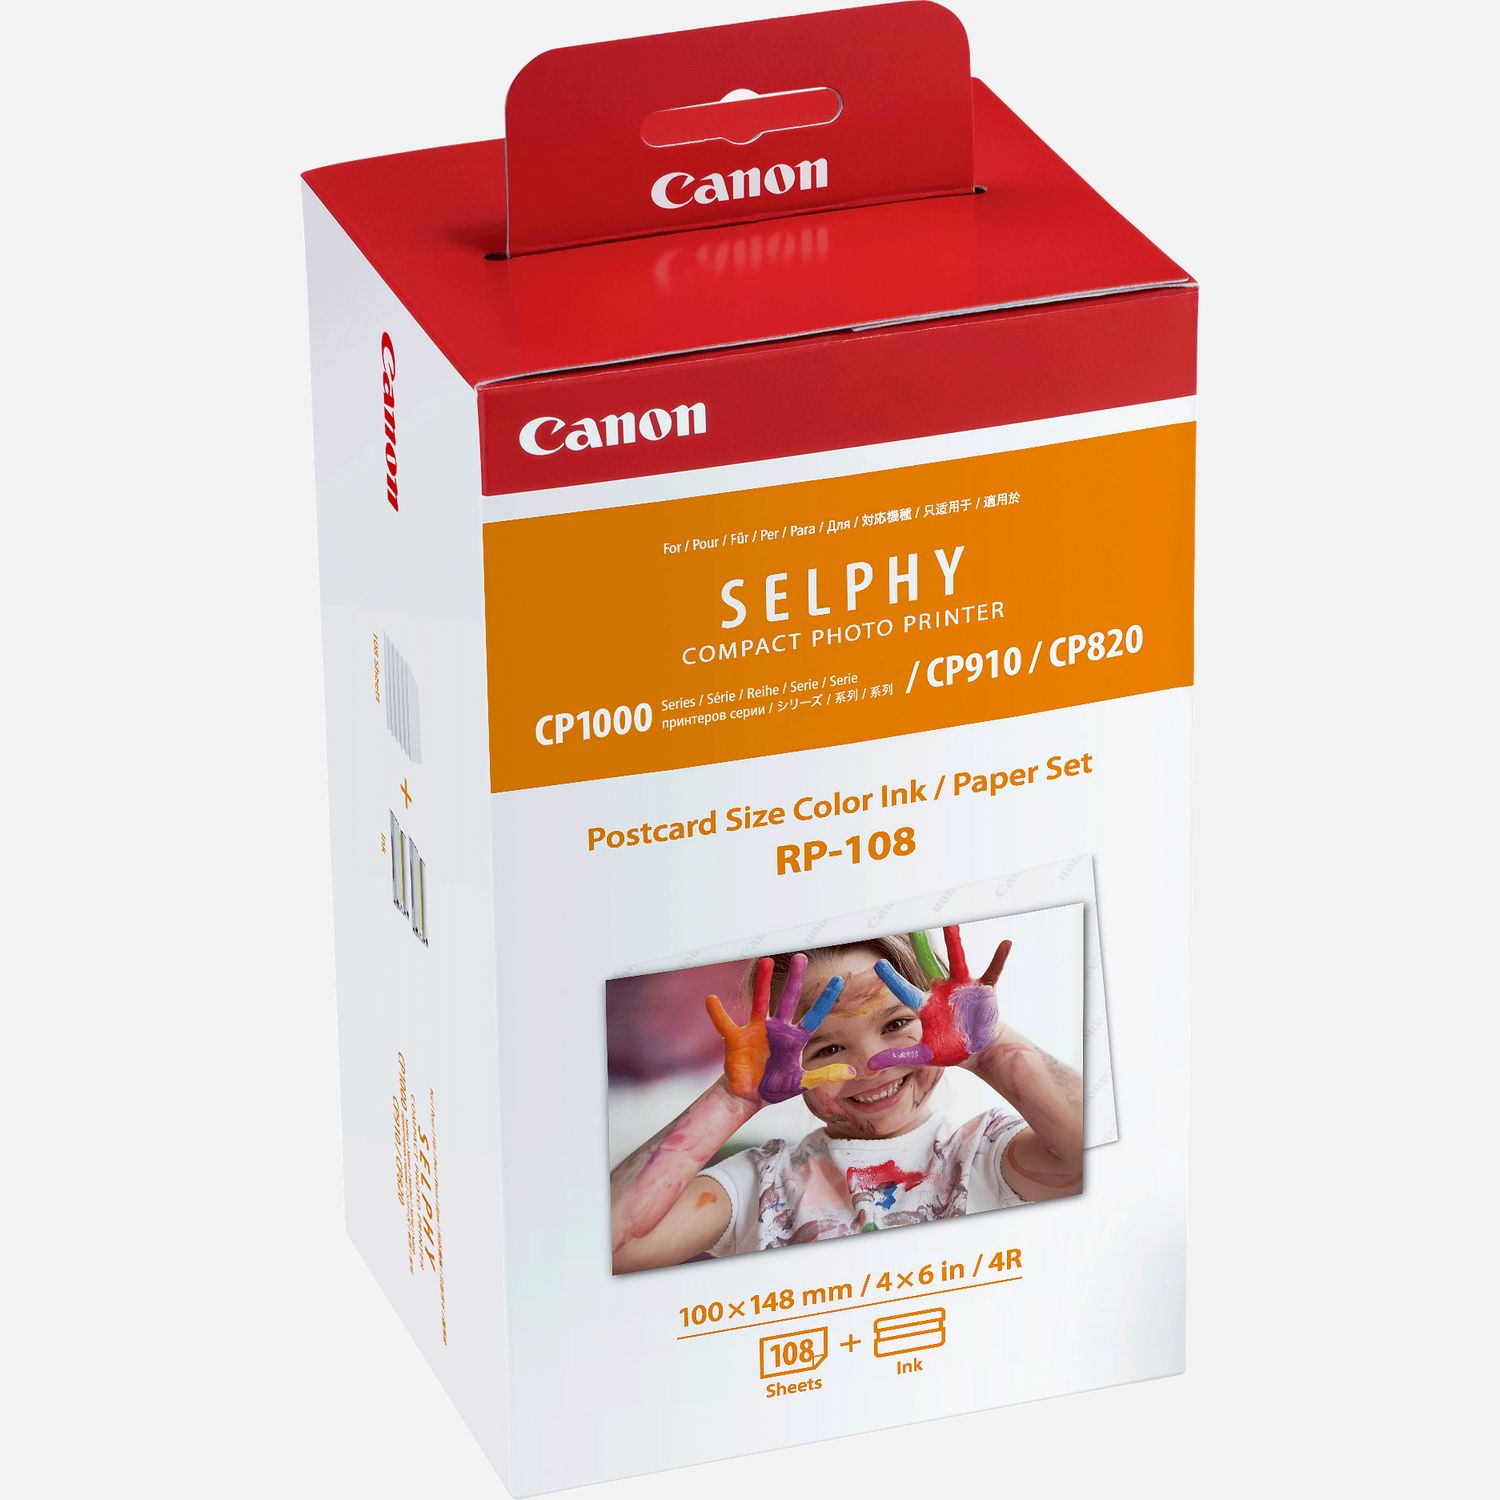 Canon RP108 Selphy Color Ink Paper Set (108 Sheets) RP-108